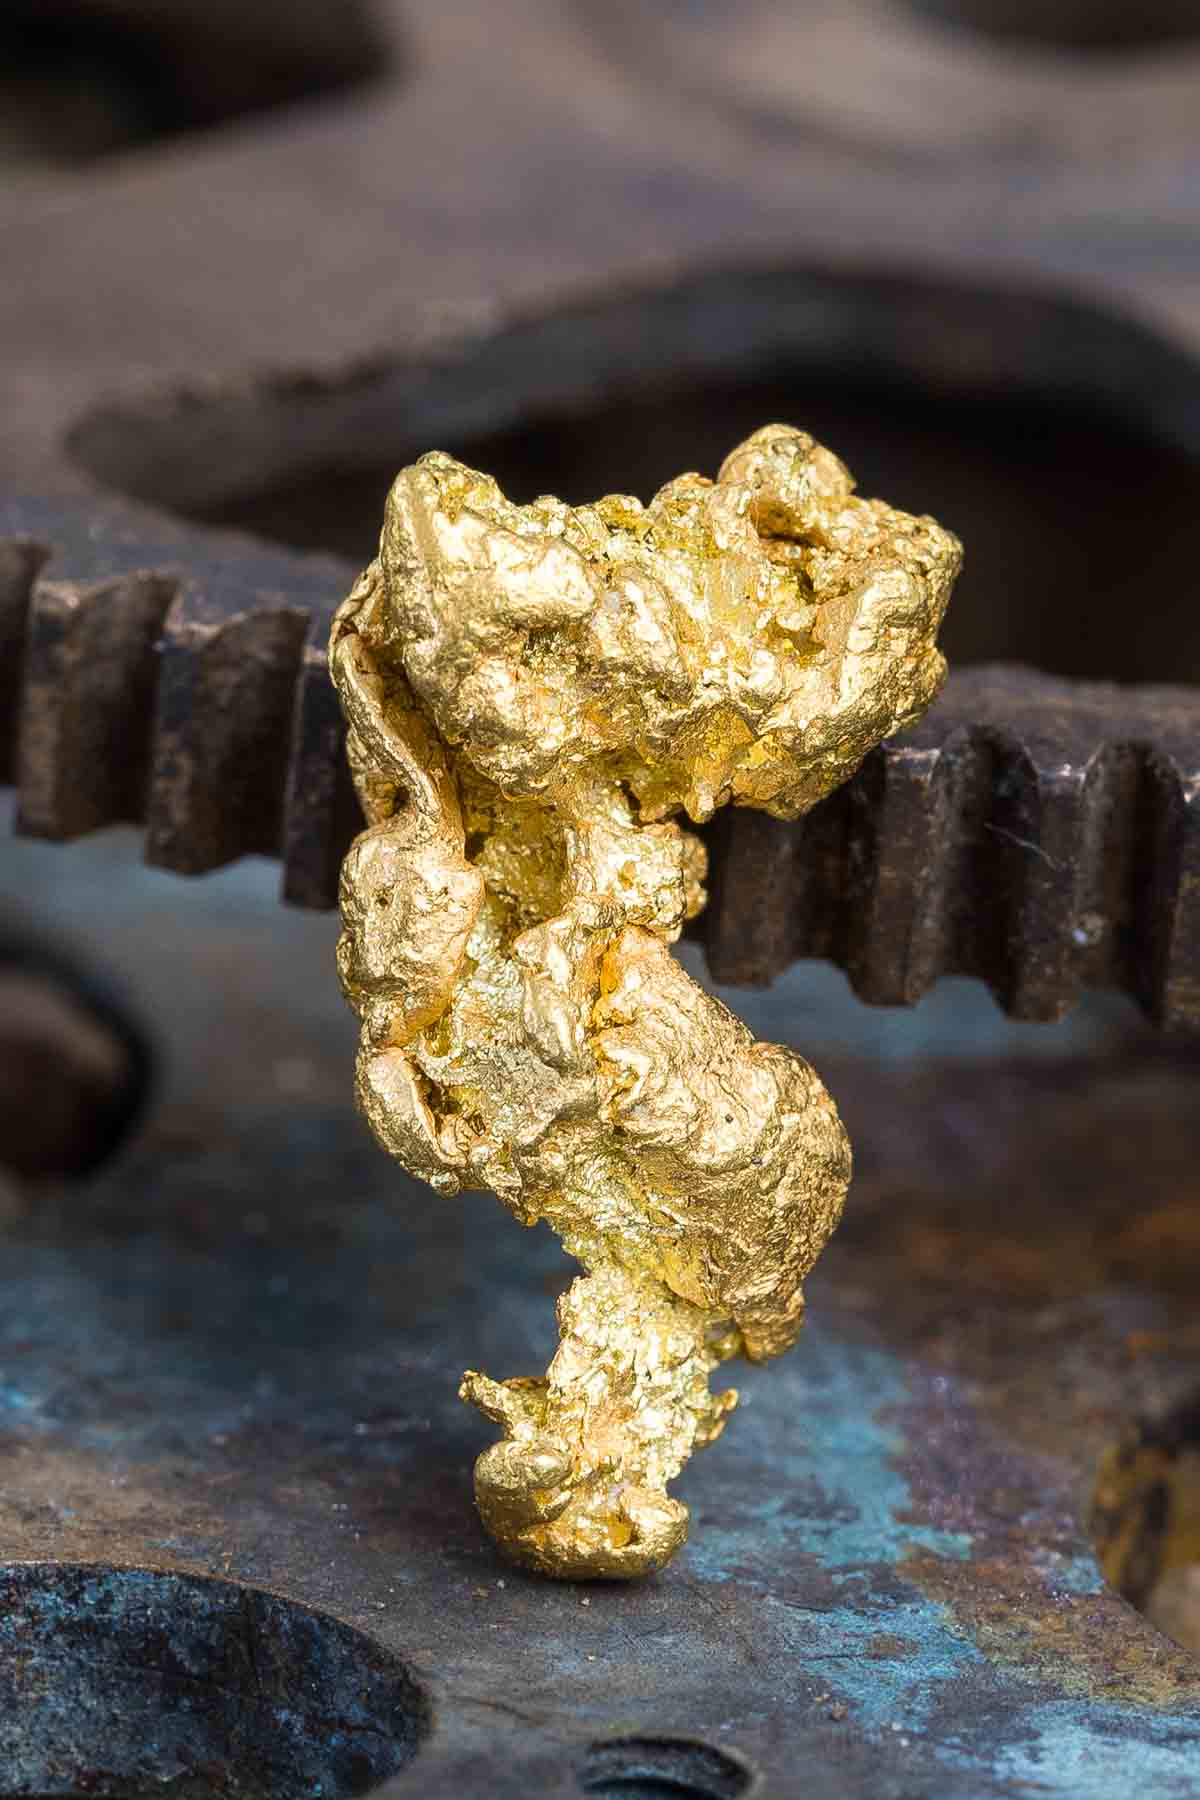 Unique Curved and Tapered Natural Gold Nugget from Colorado - $358.00 :  Natural gold Nuggets For Sale - Buy Gold Nuggets and Specimens, The finest  jewelry/investment grade gold nuggets from around the world